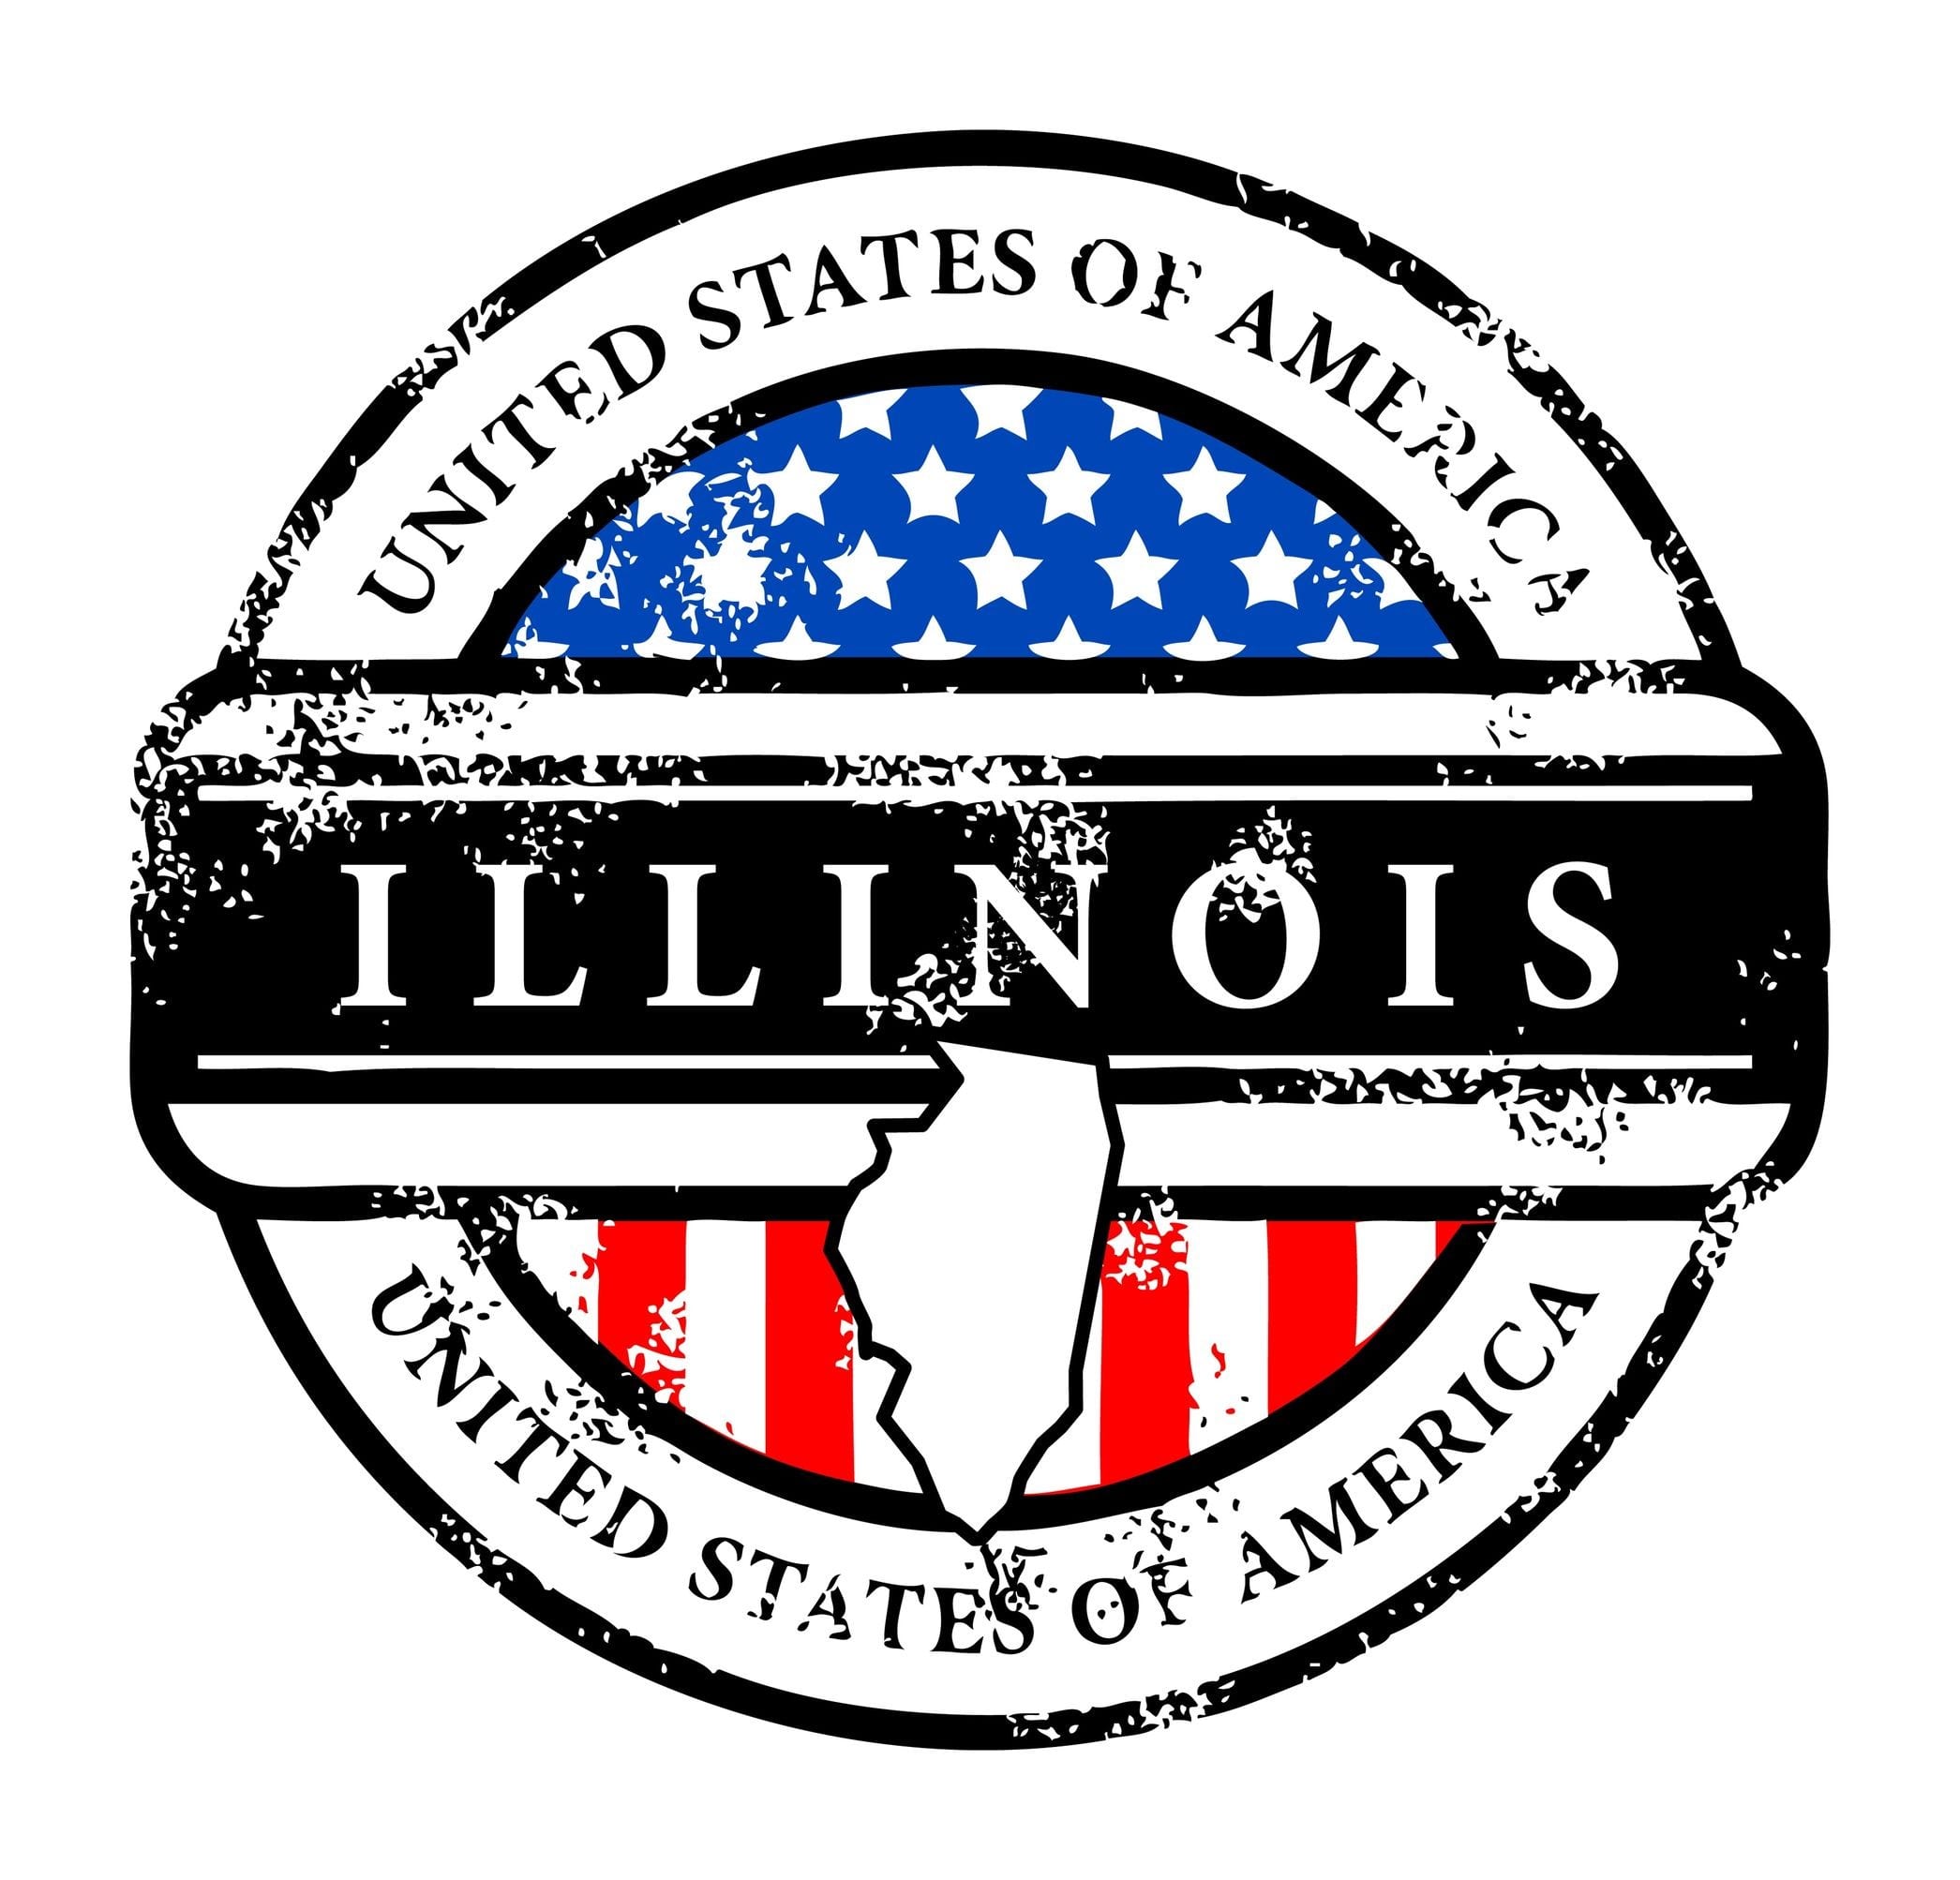 How Do Offenders Register With the State of Illinois